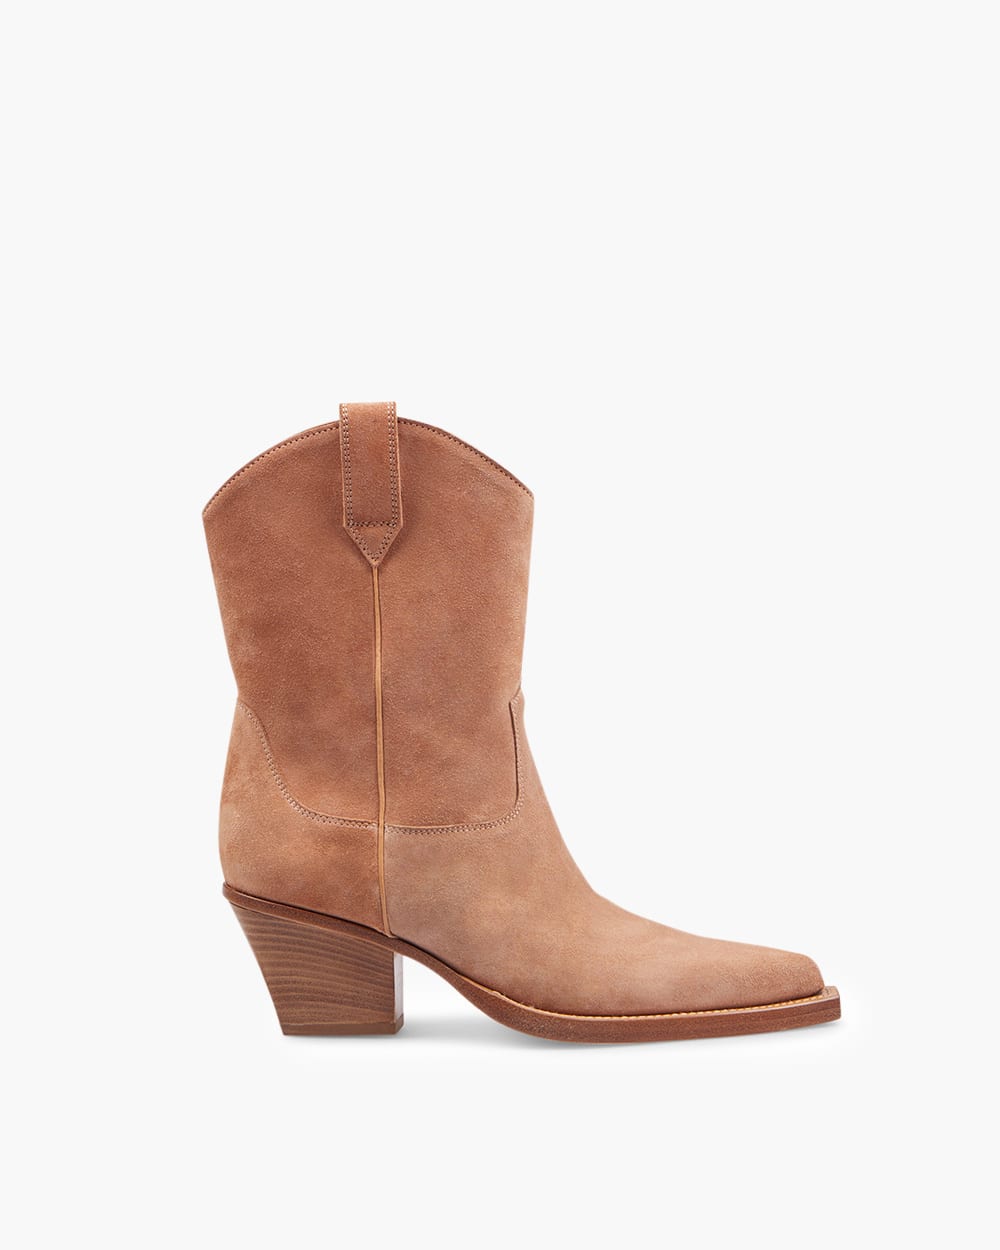 Paris Texas Sharon Suede Ankle Booties